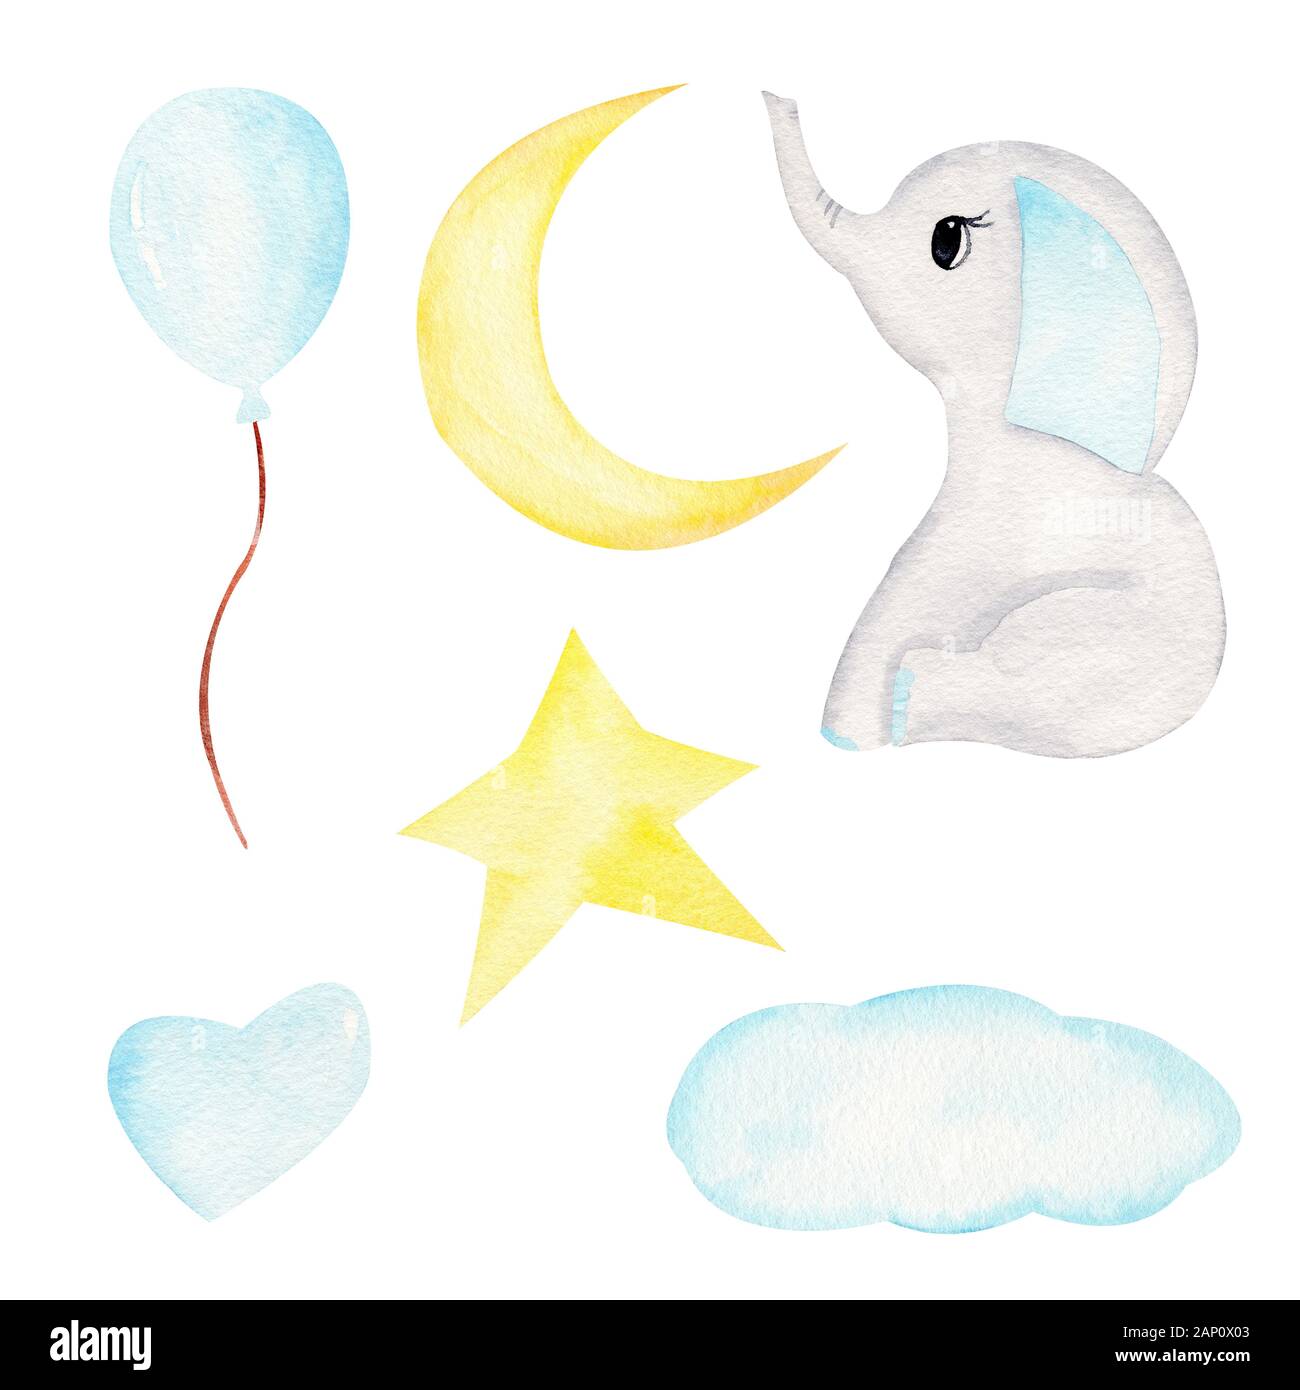 Baby elephant and celestial bodies hand drawn raster illustration. Animal boy and balloon, star, moon and clouds watercolor set. Cute isolated aquarel Stock Photo